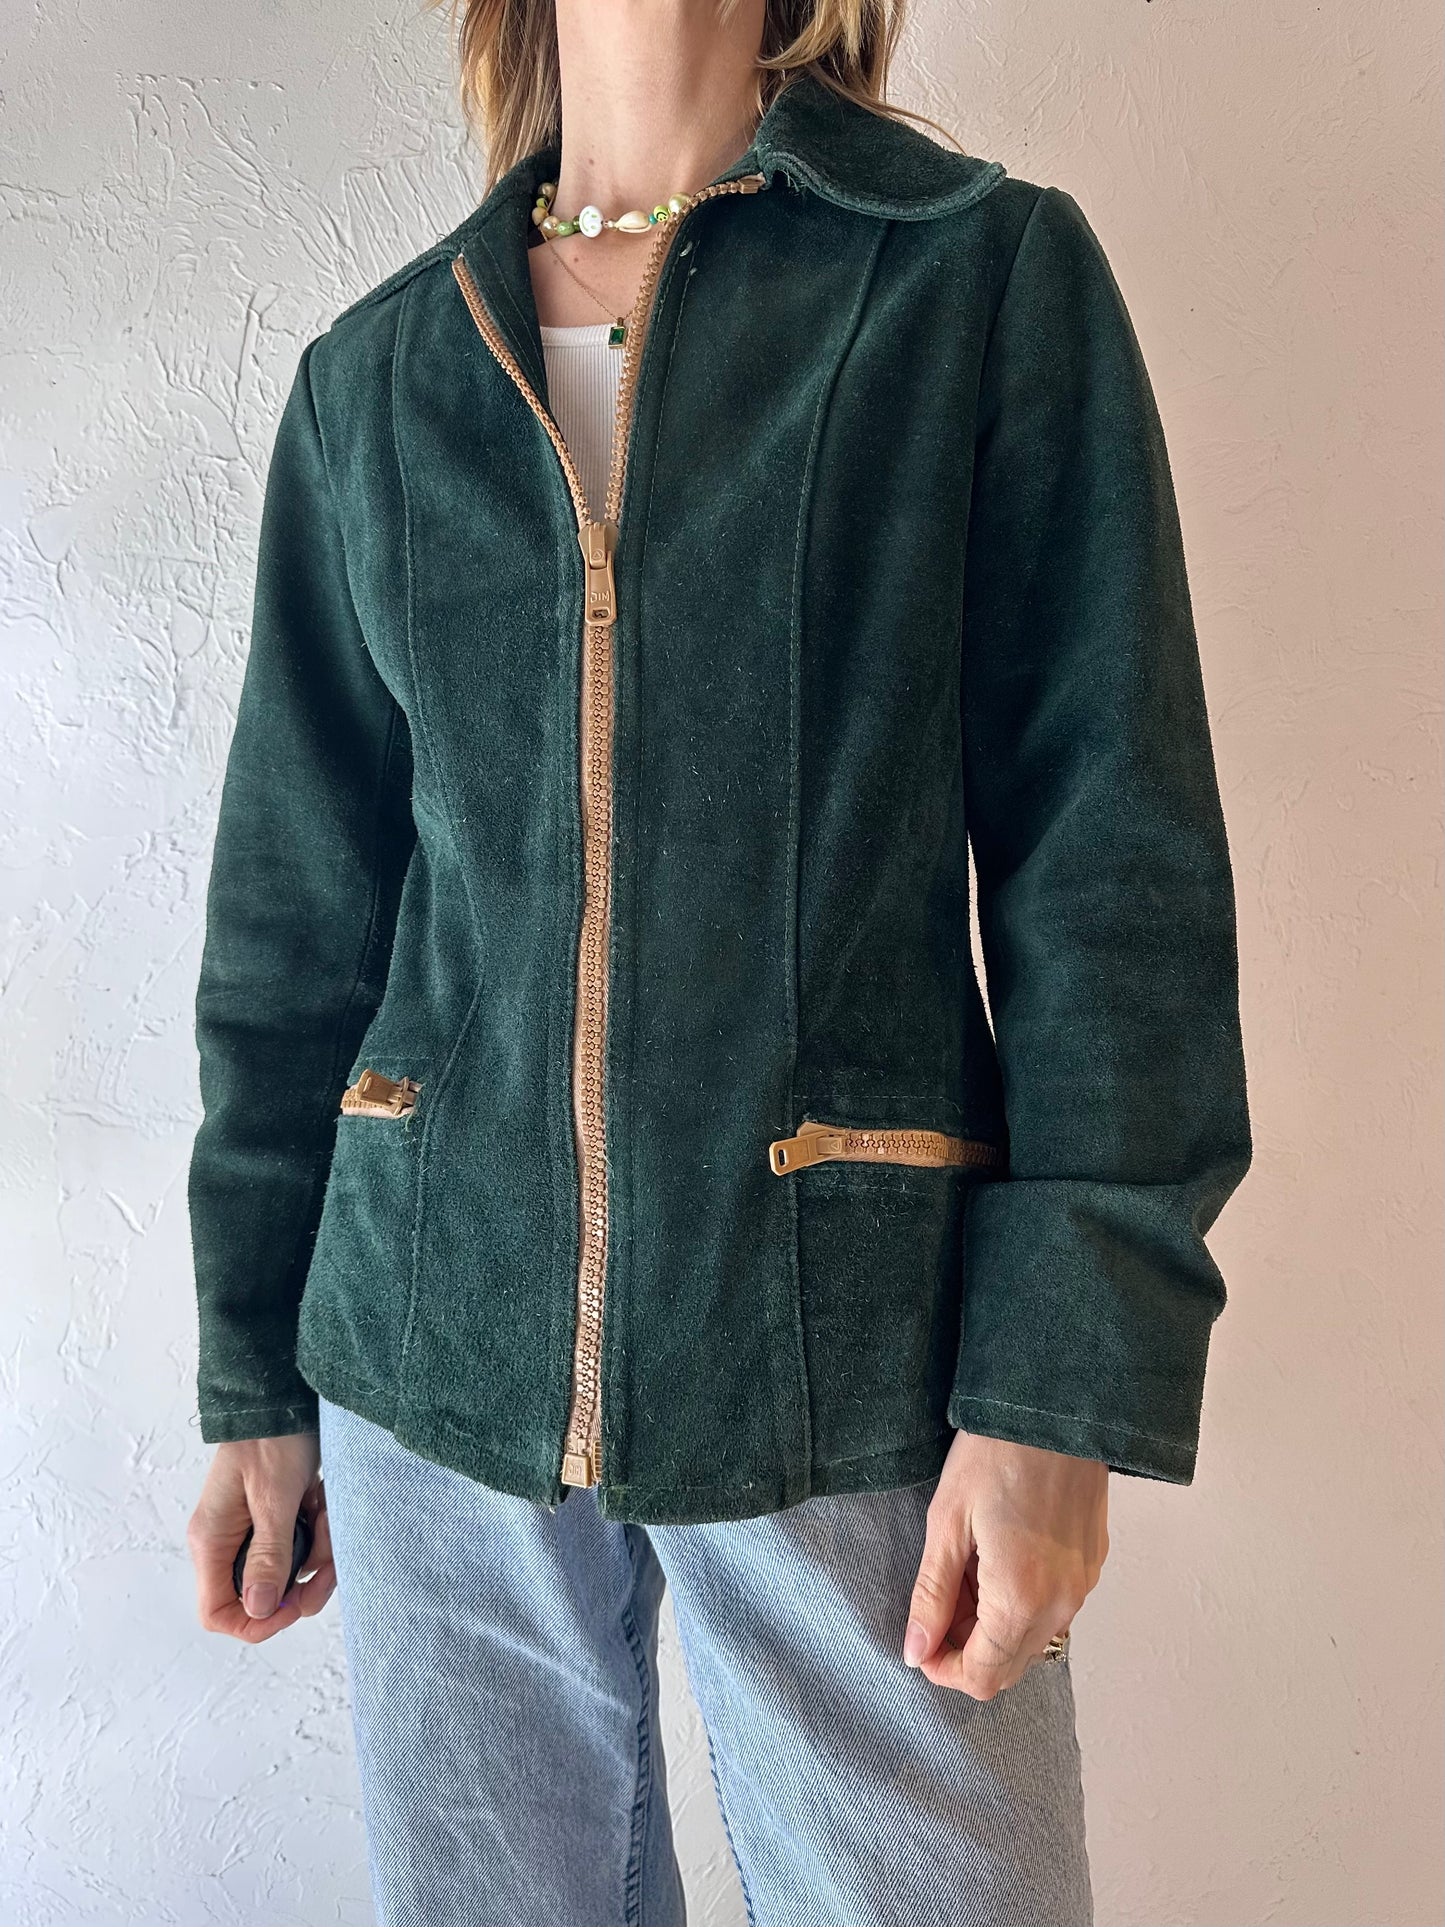 Vintage Green Thick Suede Jacket / Small